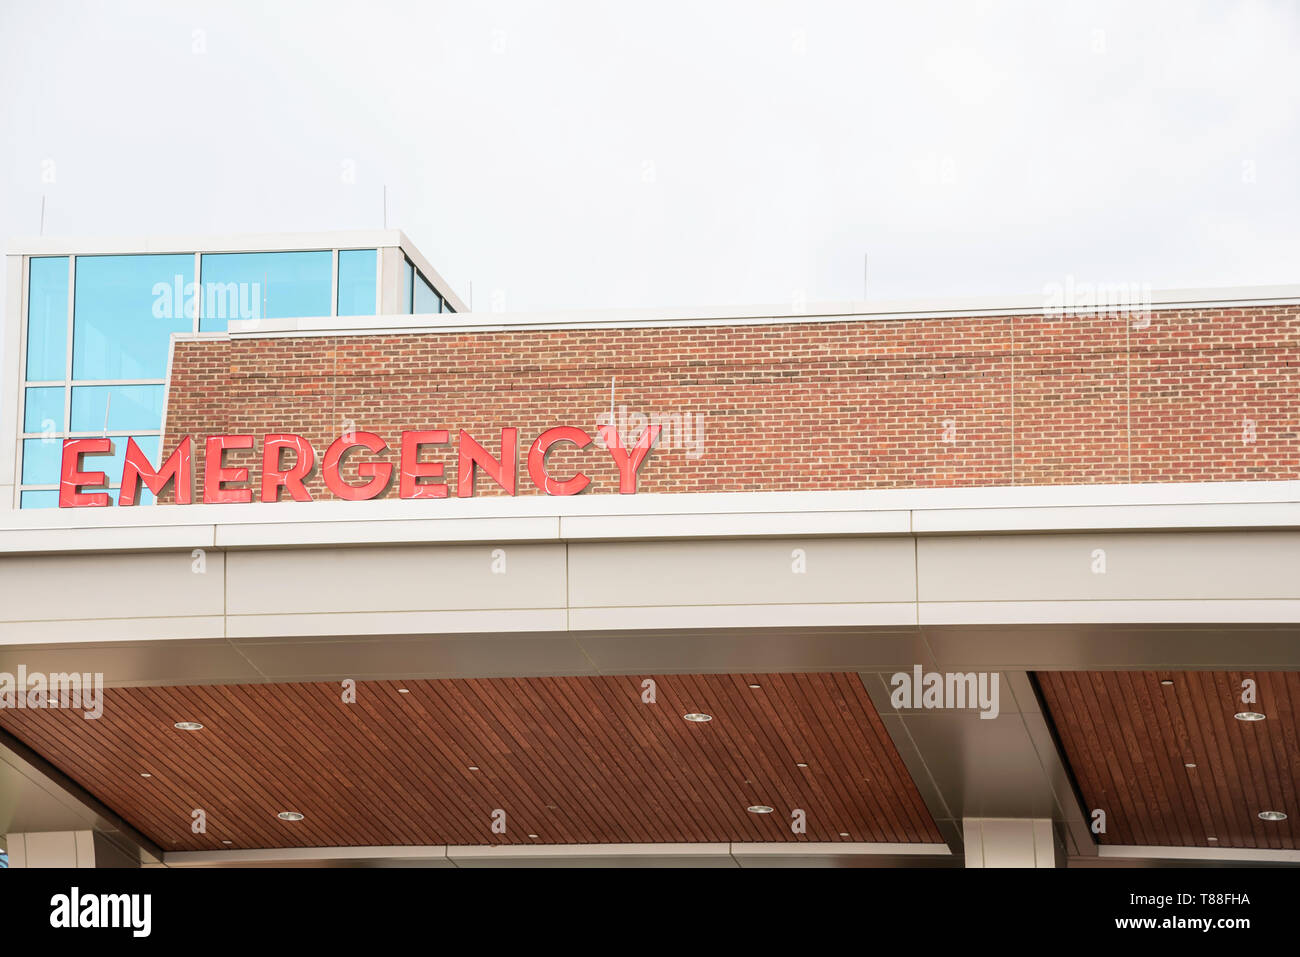 A prominent red 3D all-caps lighted emergency directional sign and marker perched on the awning and canopy of the main hospital entrance. Stock Photo